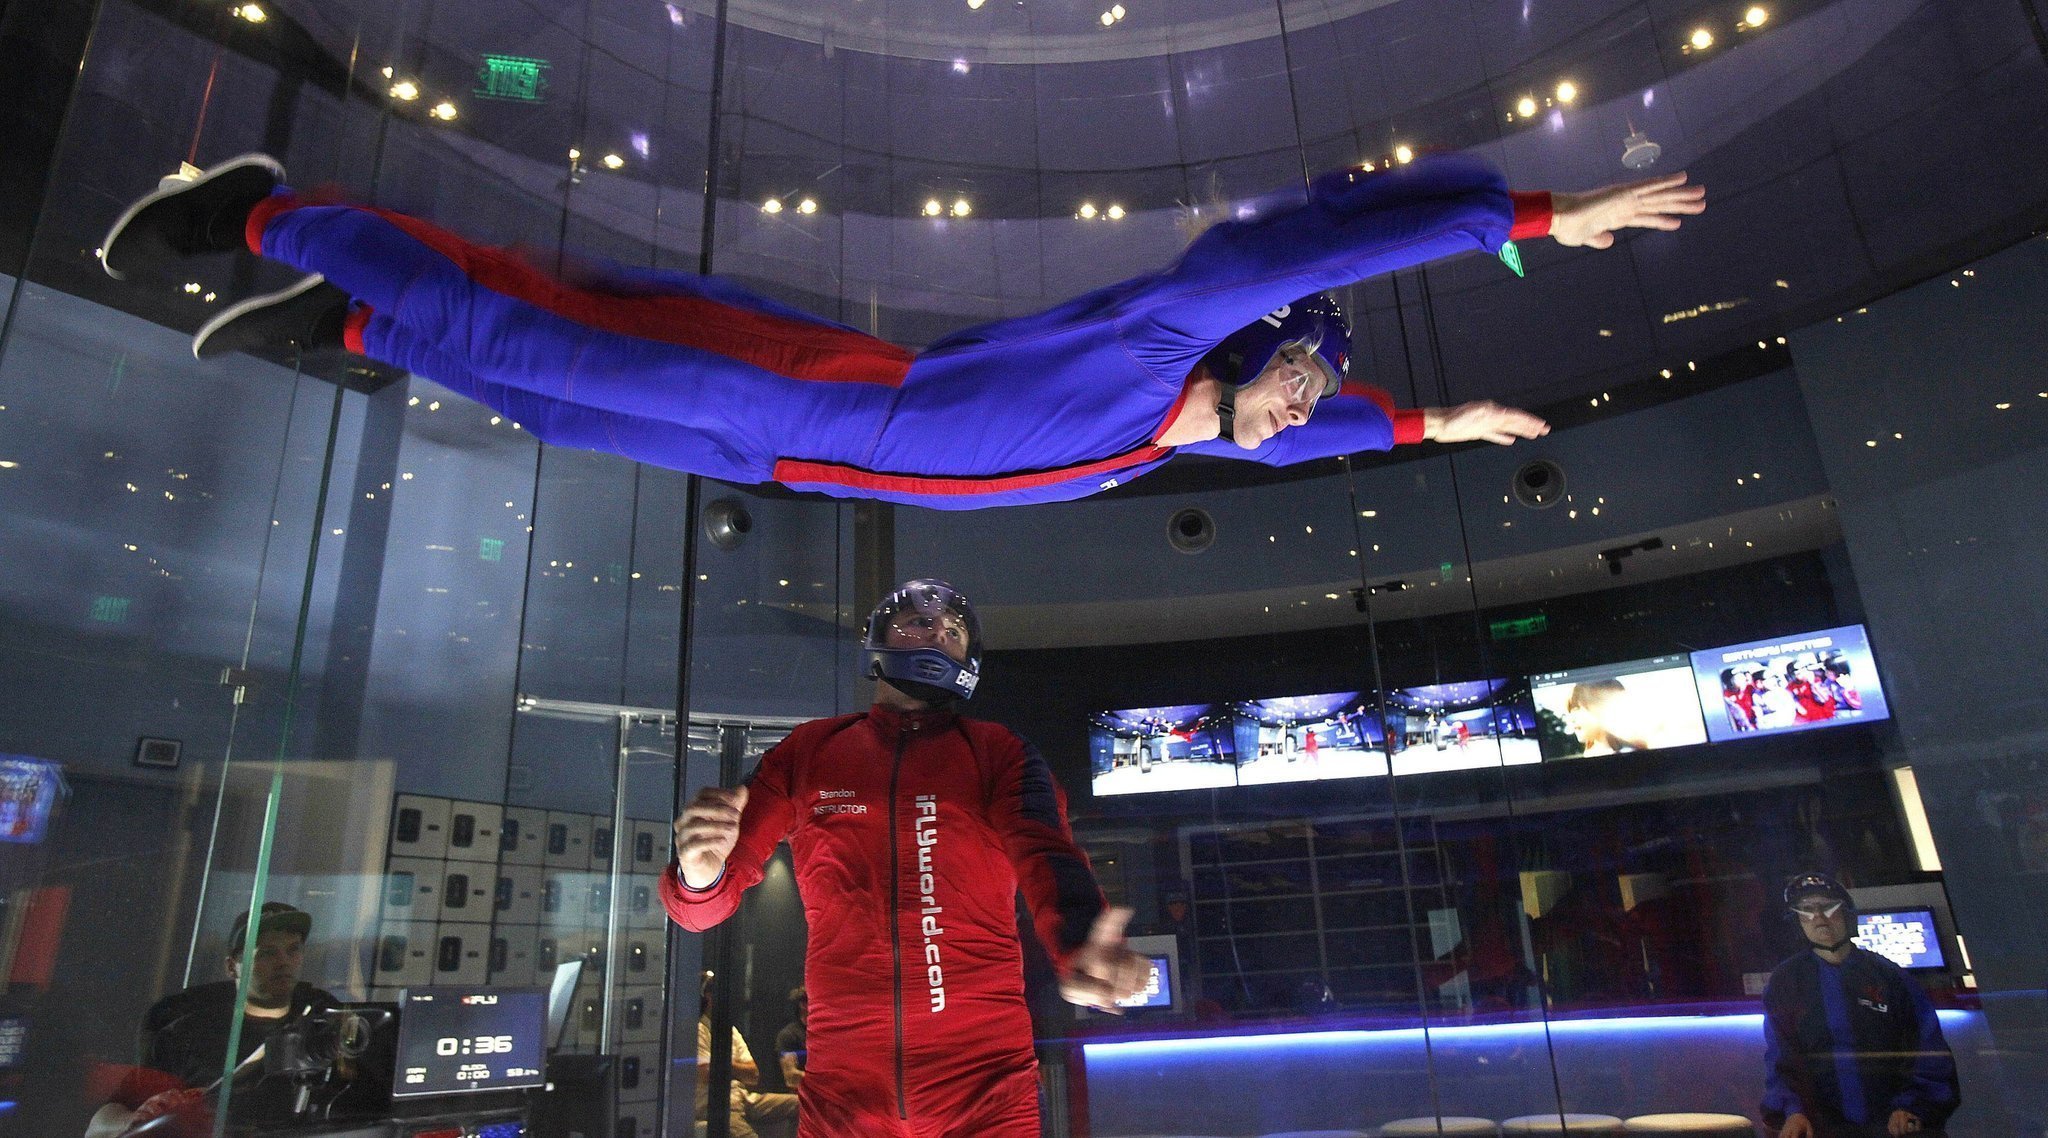 Test driving iFLY San Diego indoor skydiving The San Diego UnionTribune